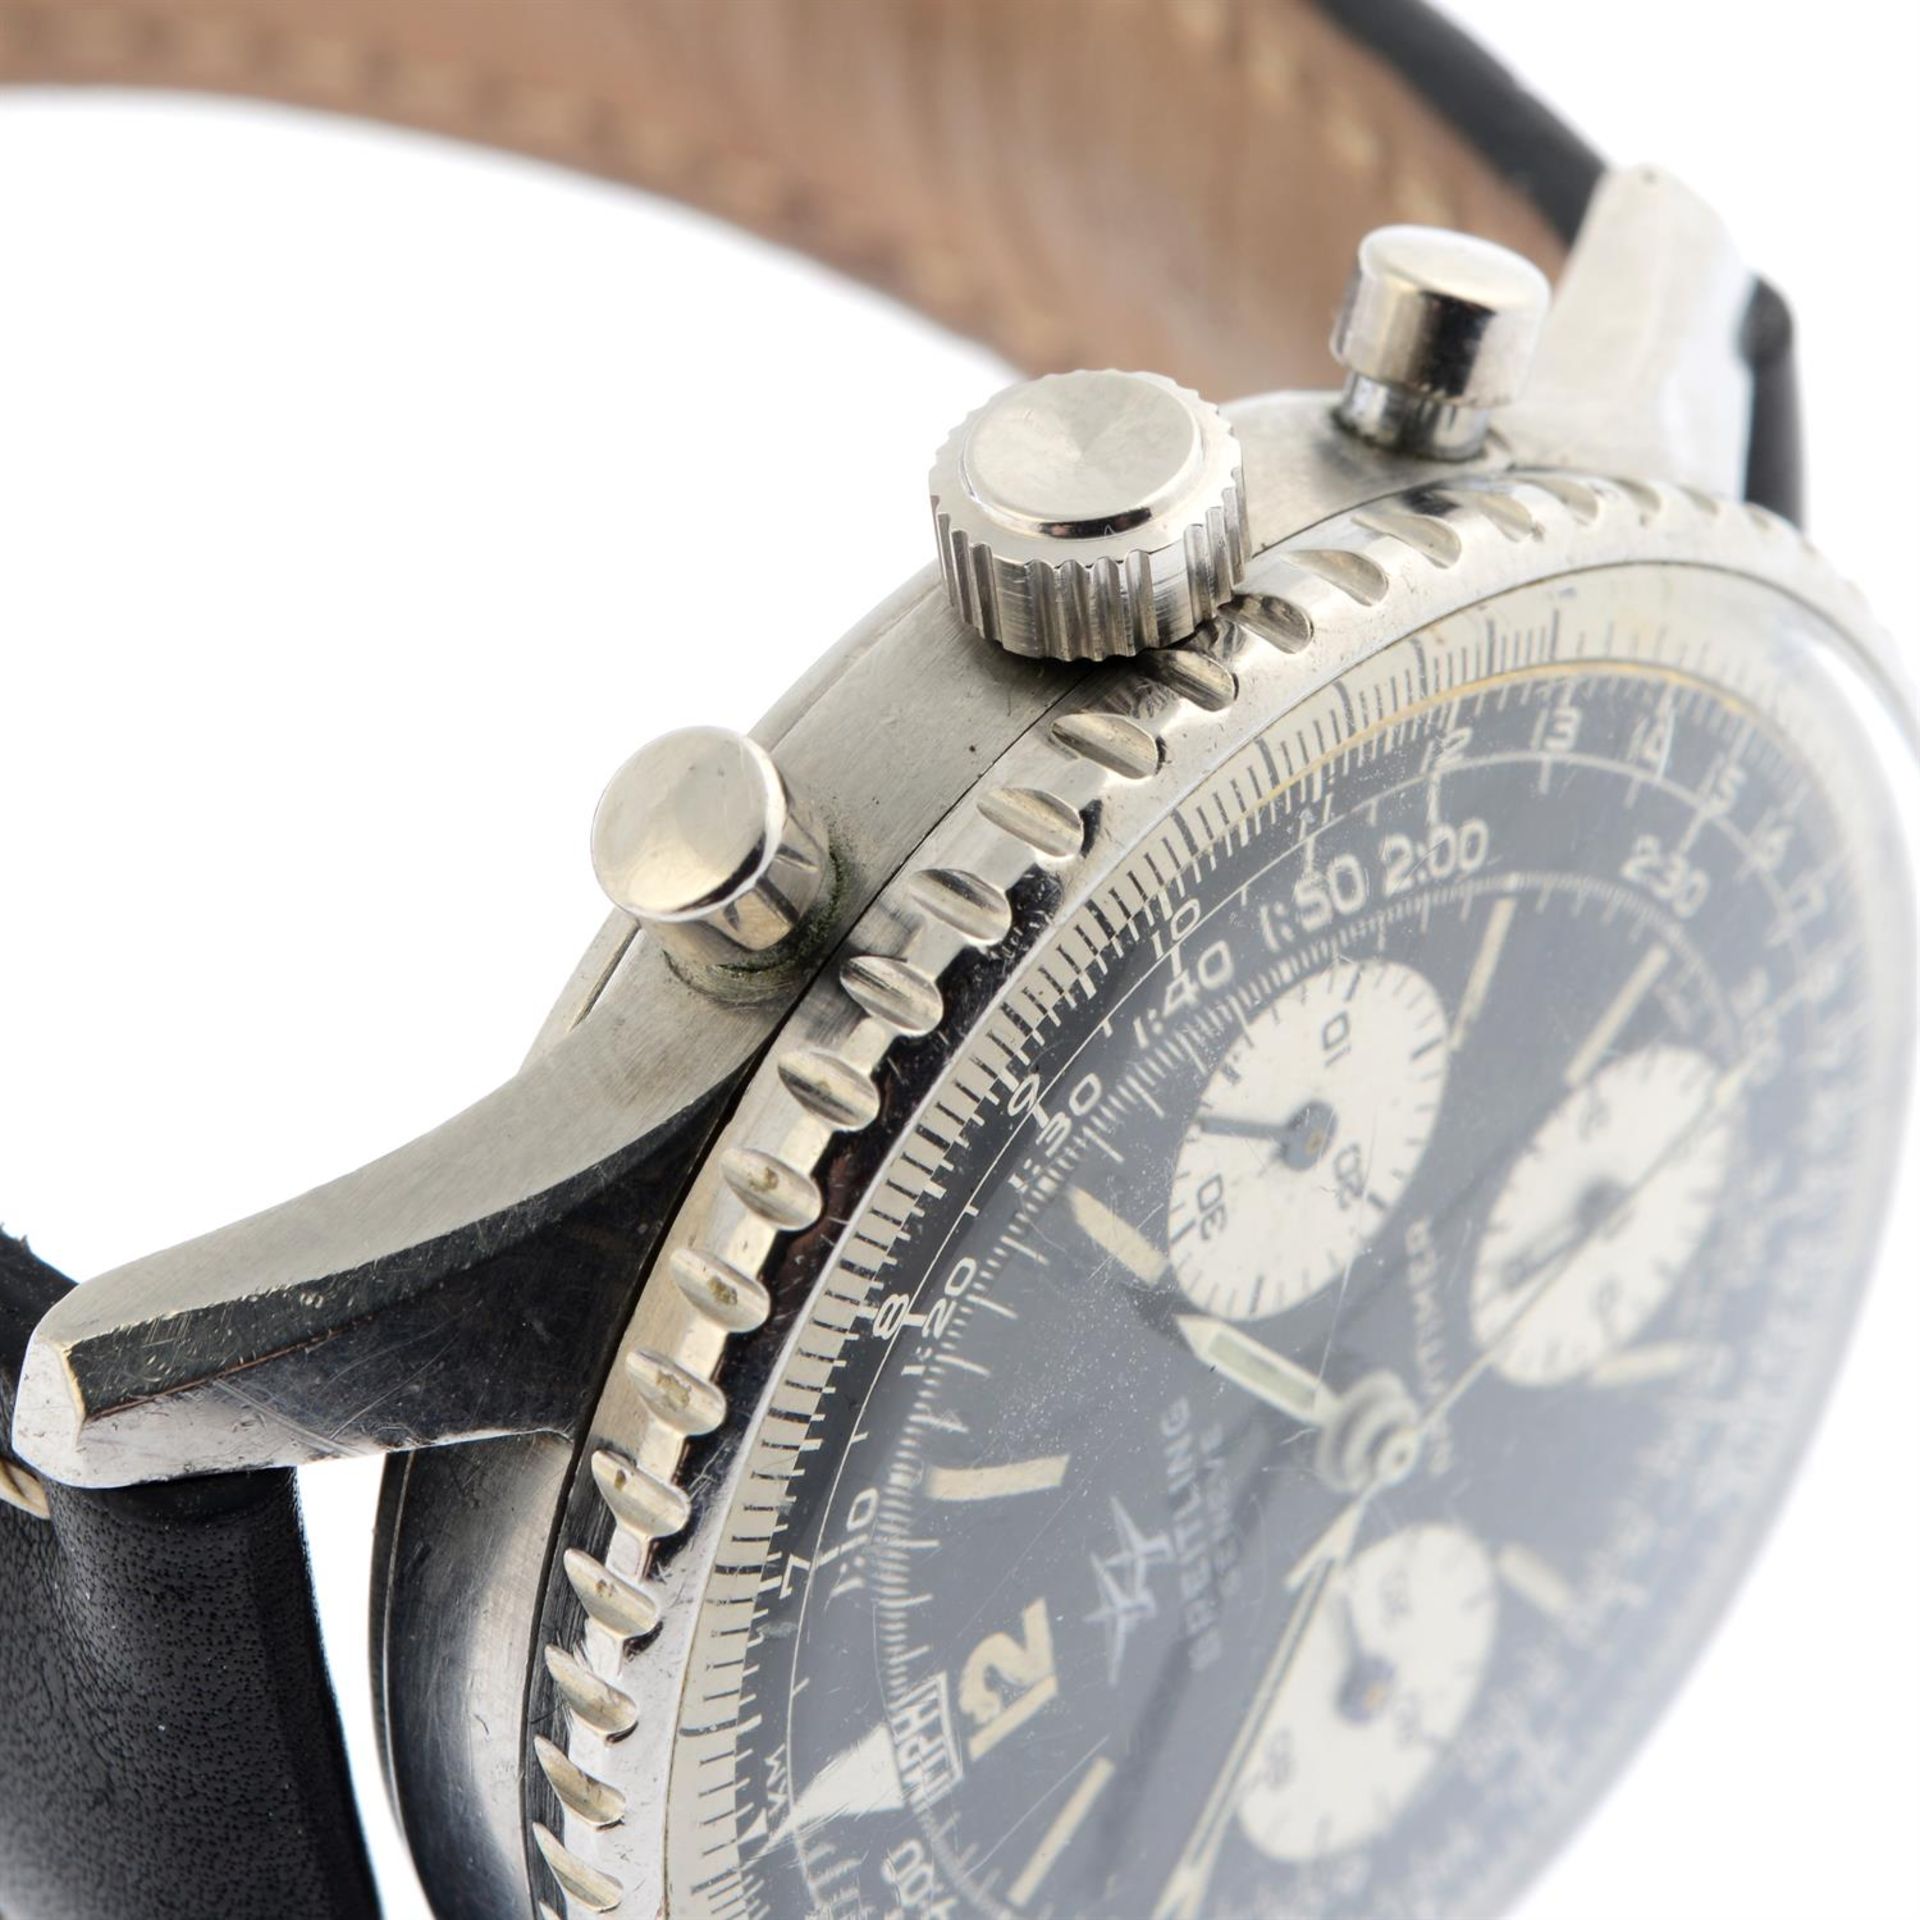 BREITLING - a stainless steel Navitimer chronograph wrist watch, 40mm. - Image 4 of 5